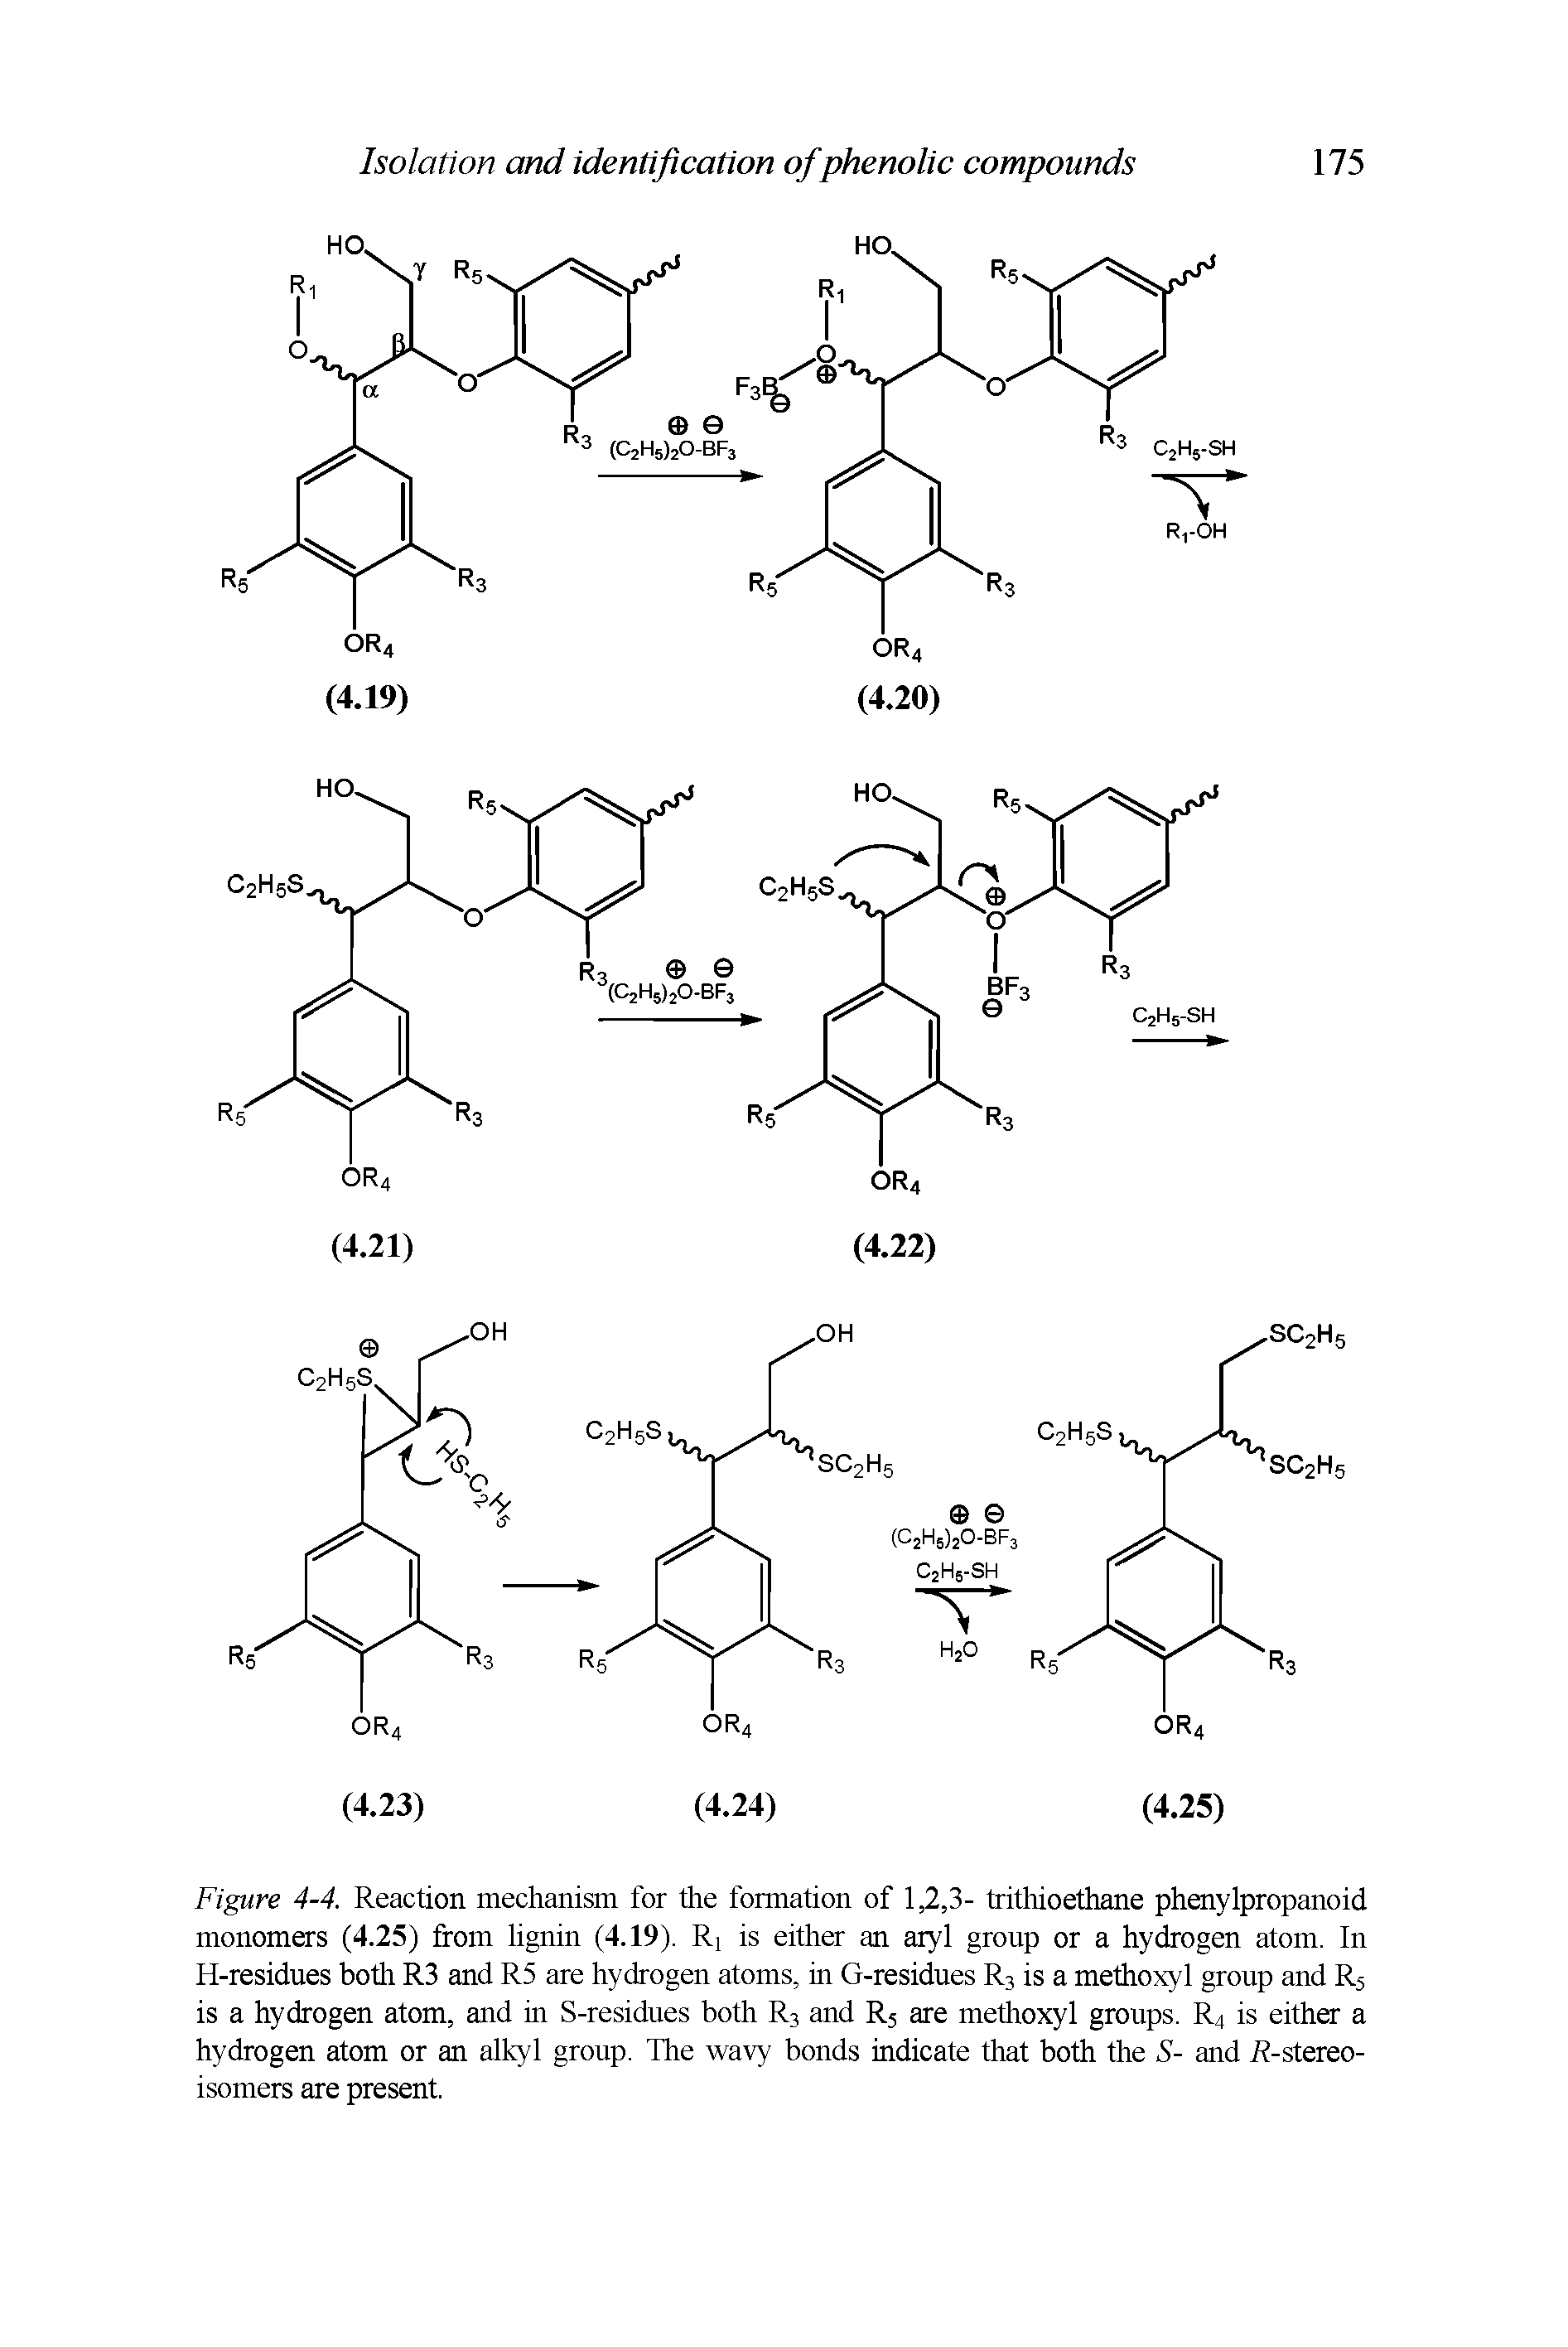 Figure 4-4. Reaction mechanism for the formation of 1,2,3- trithioethane phenylpropanoid monomers (4.25) from lignin (4.19). Ri is either an aryl group or a hydrogen atom. In H-residues both R3 and R5 are hydrogen atoms, in G-residues R3 is a methoxyl group and R5 is a hydrogen atom, and in S-residues both R3 and R5 are methoxyl groups. R4 is either a hydrogen atom or an alkyl group. The wavy bonds indicate that both the S- and R-stereo-isomers are present.